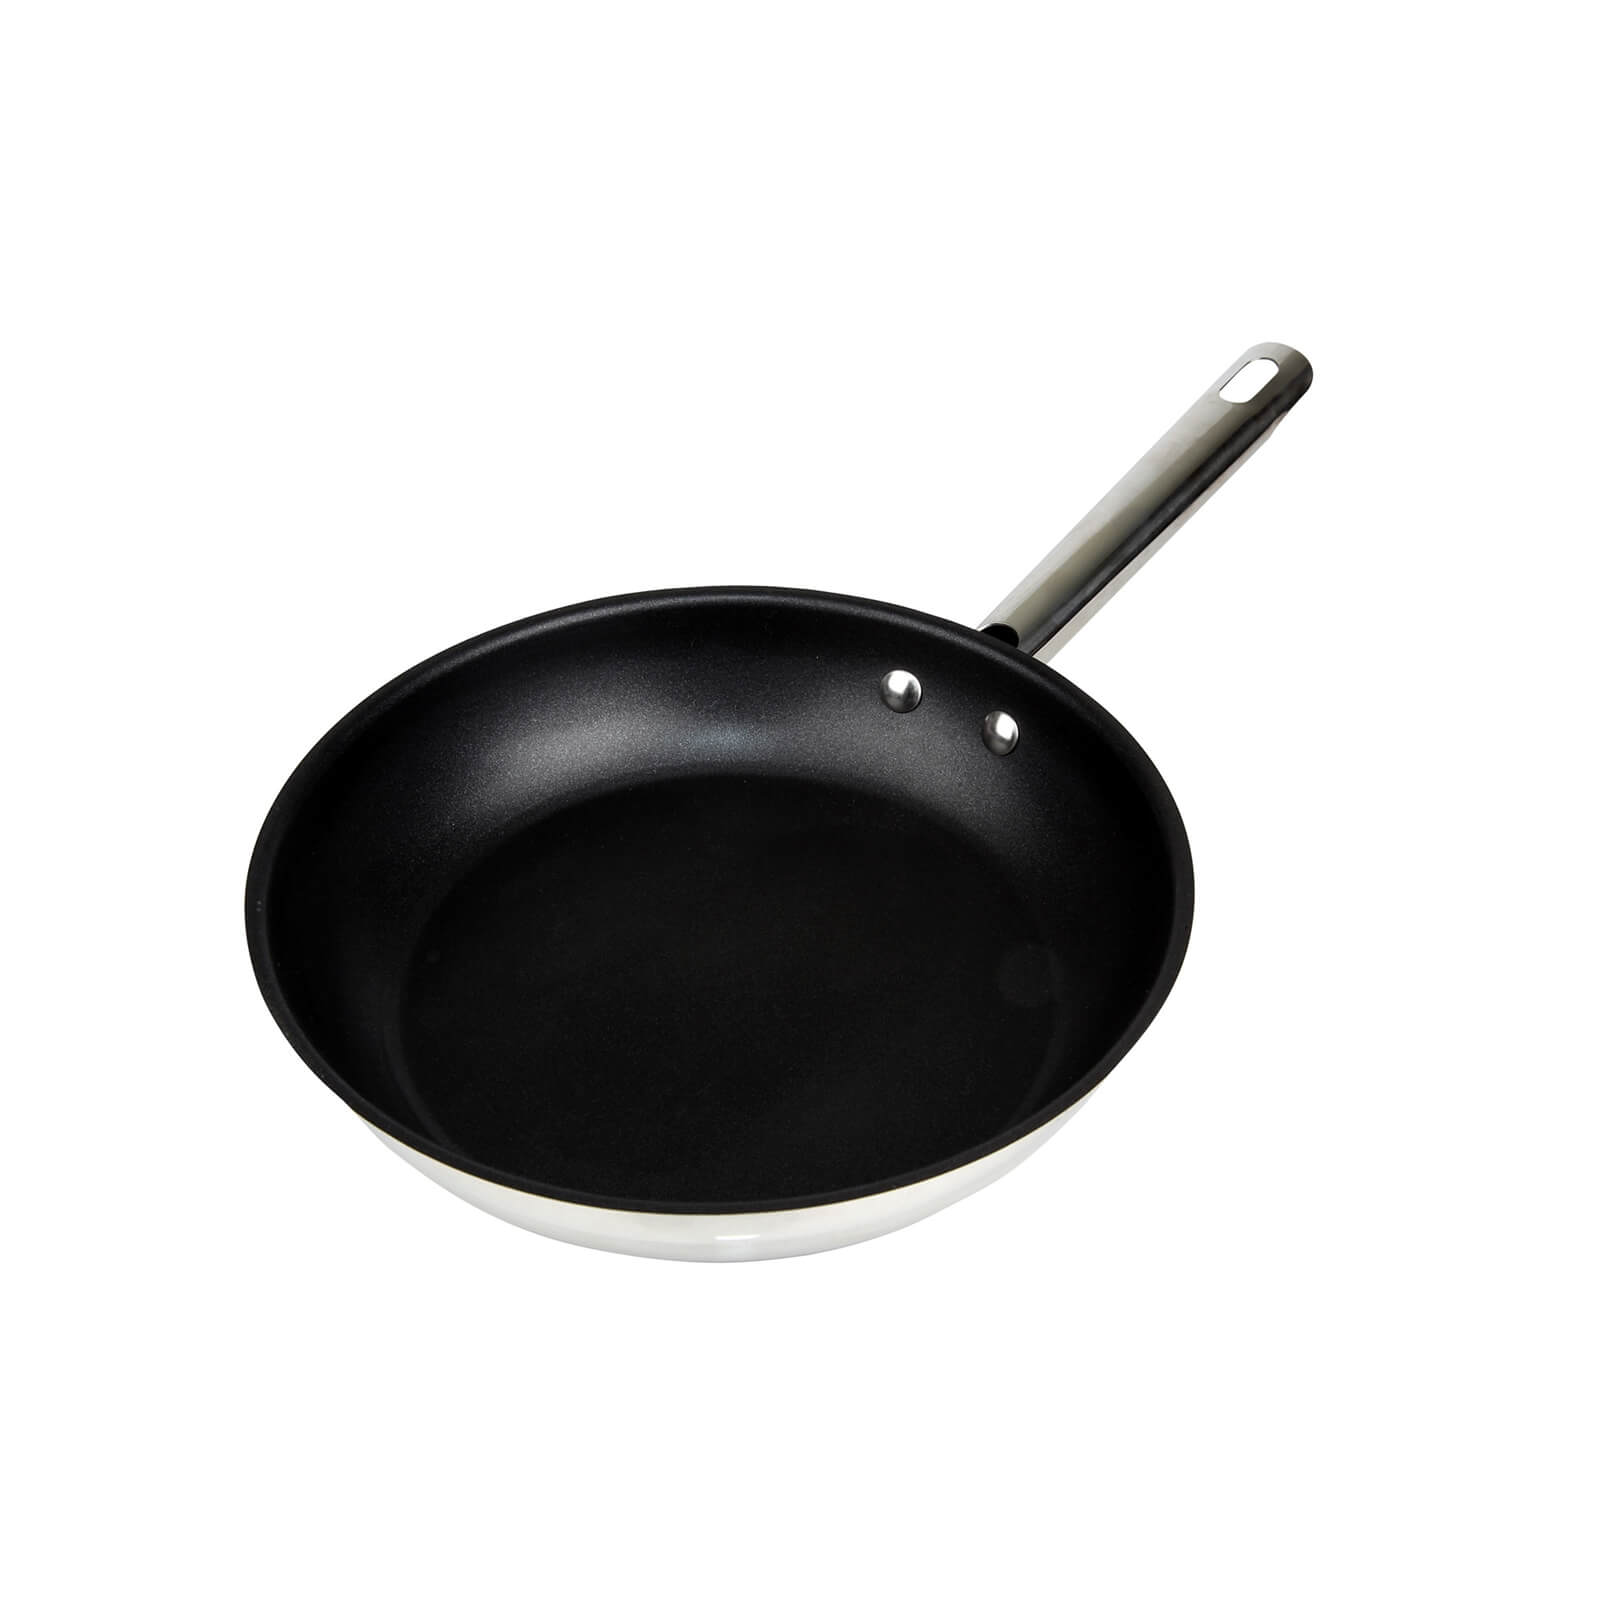 Denby Stainless Steel 3 Piece Frying Pan Set